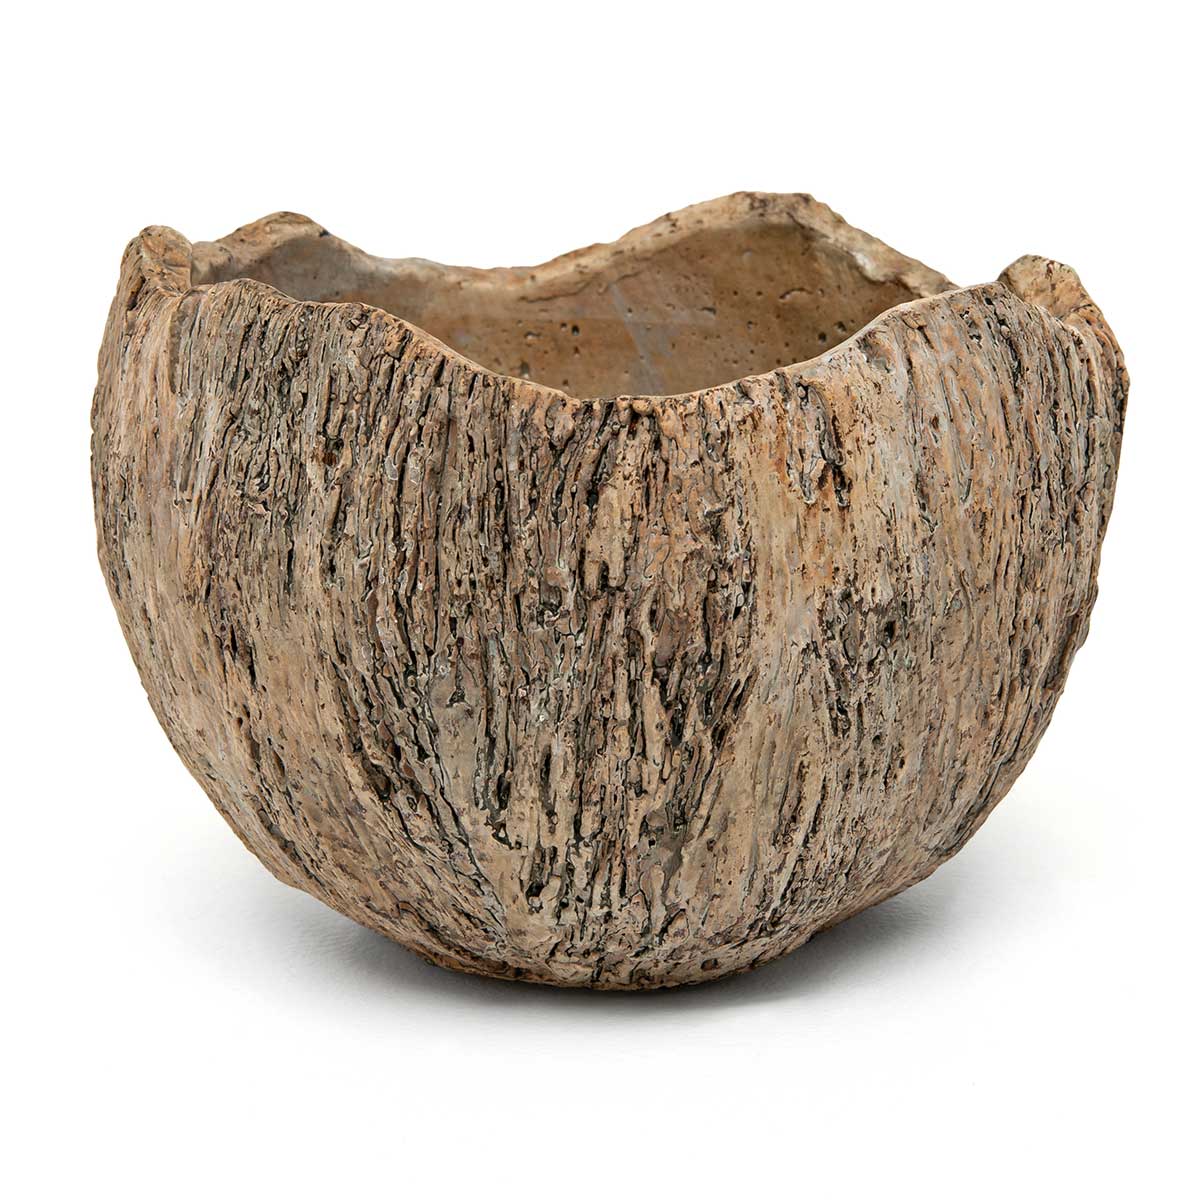 POT LOG LIVE EDGE BOWL LARGE 6.5IN X 5IN BROWN CONCRETE